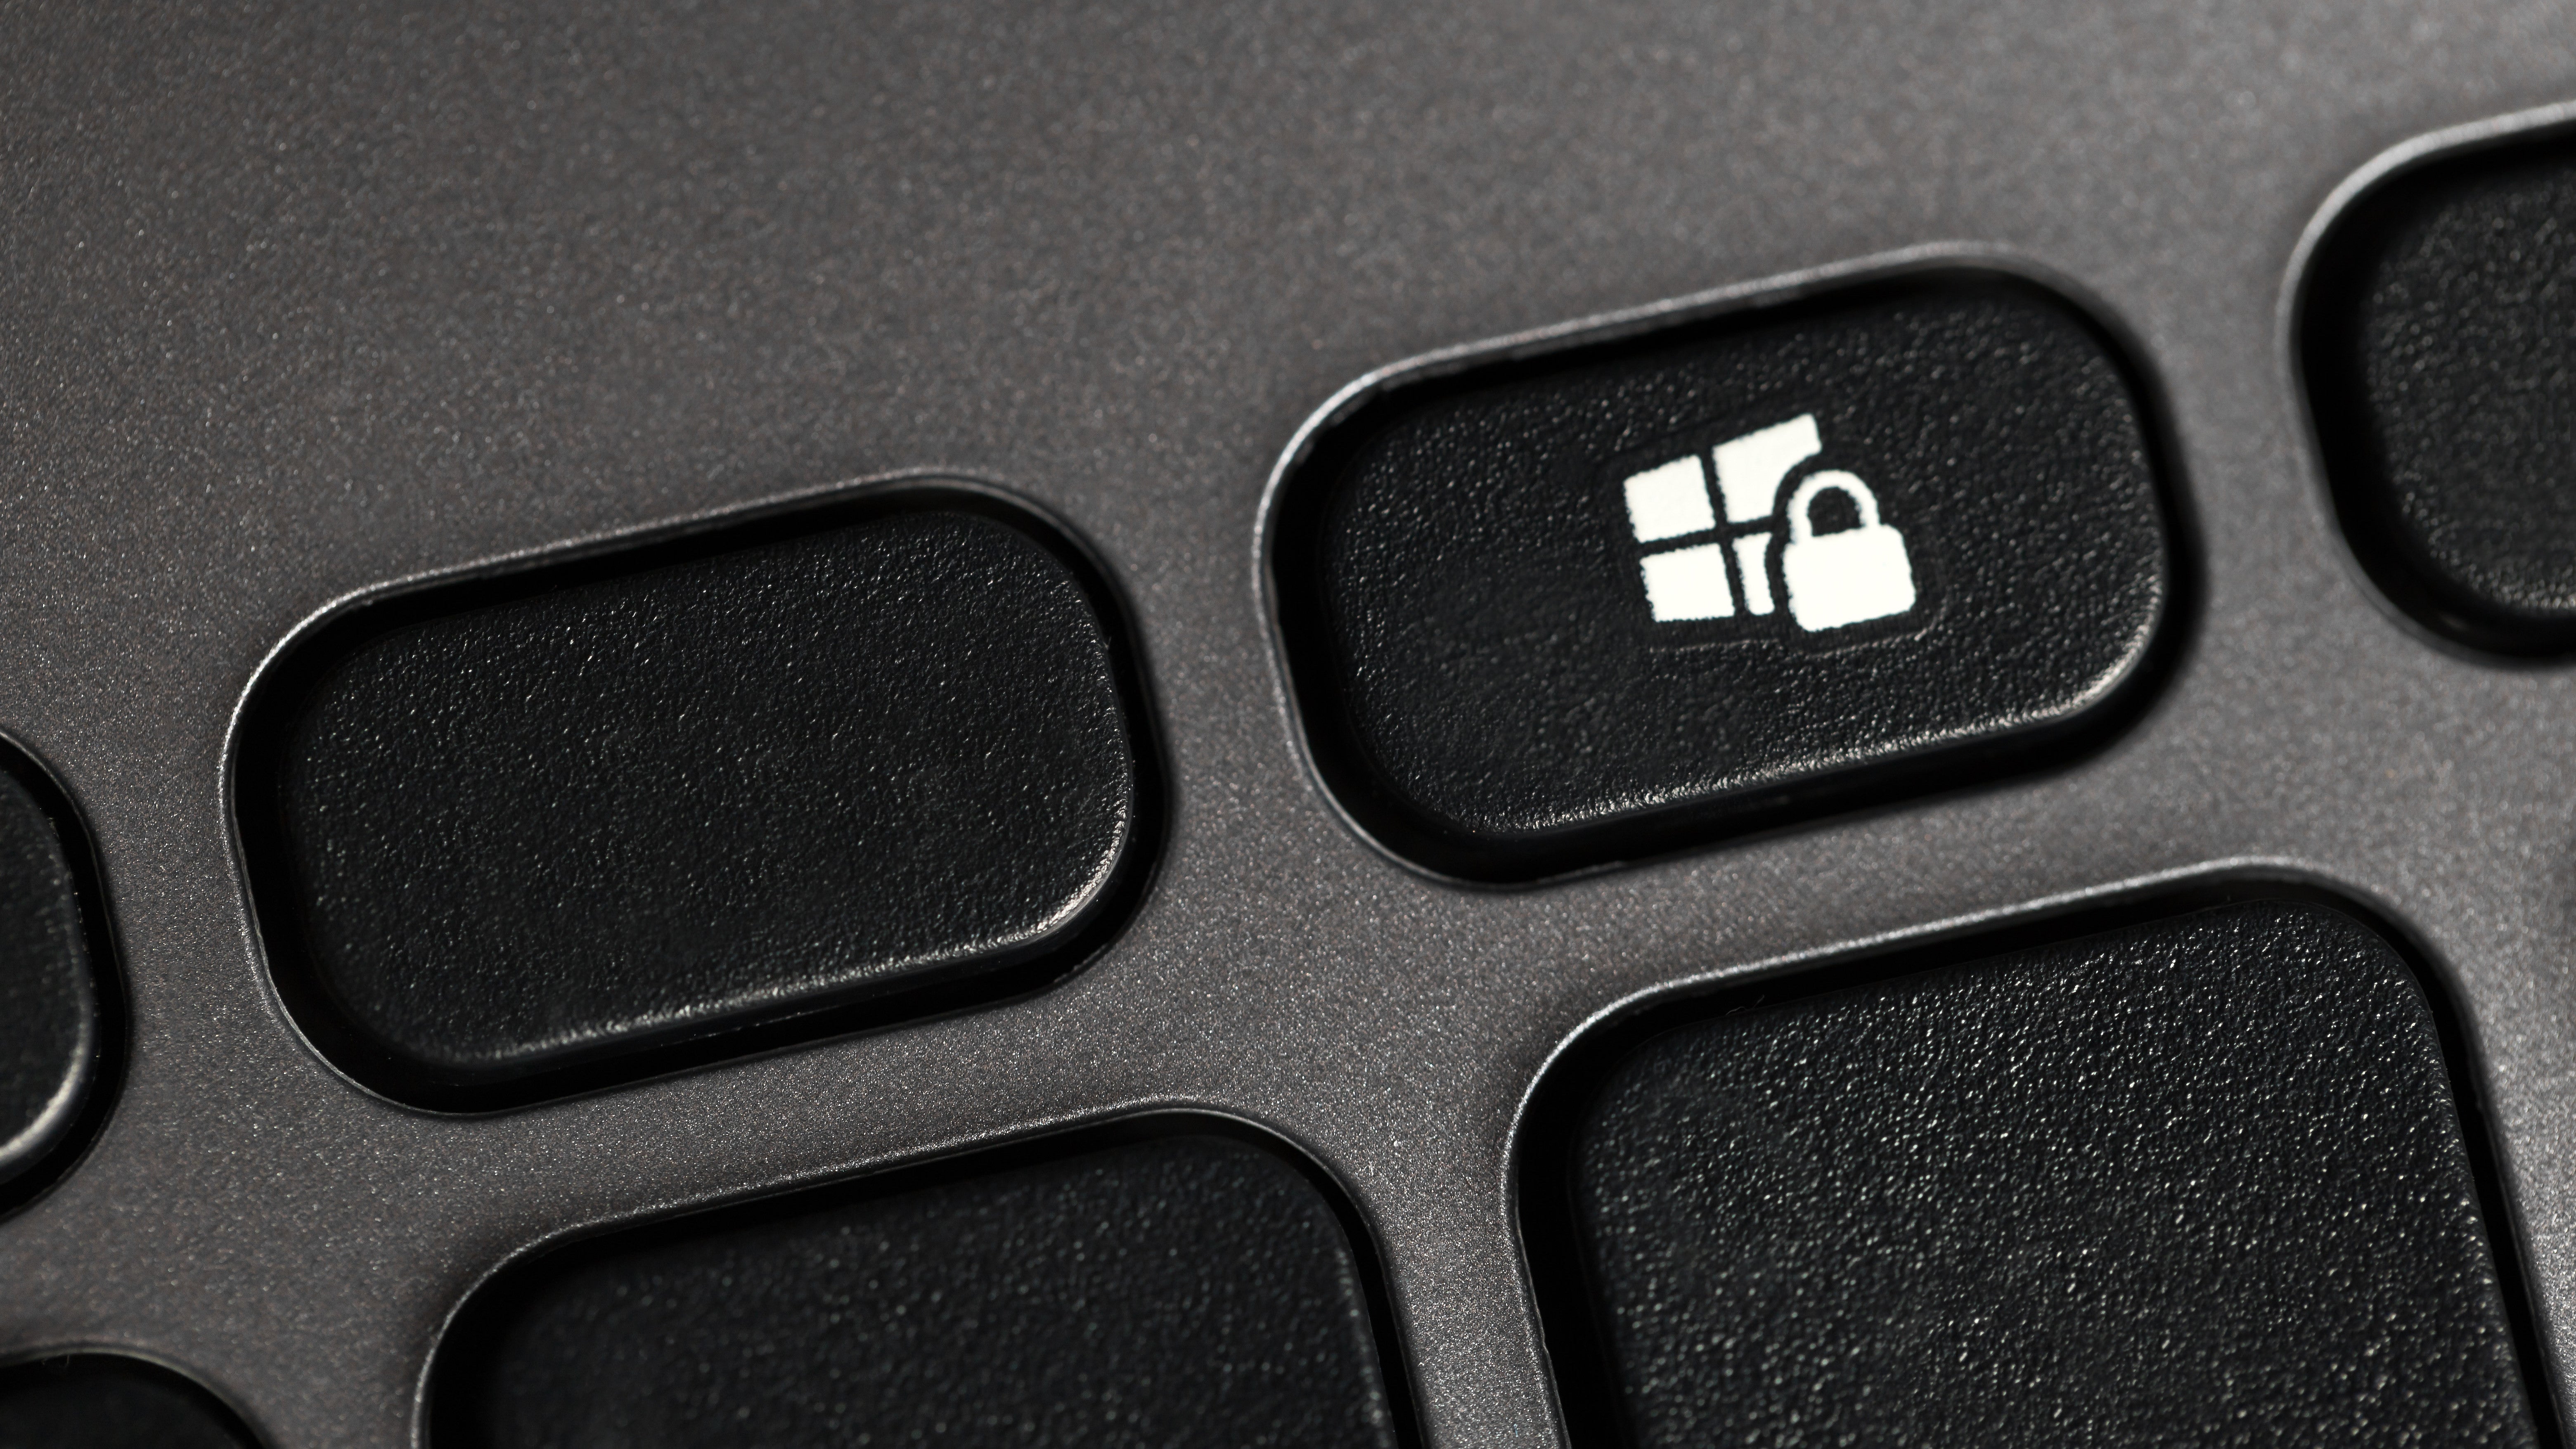 Update Windows 10 Now To Block ‘SMBGhost’